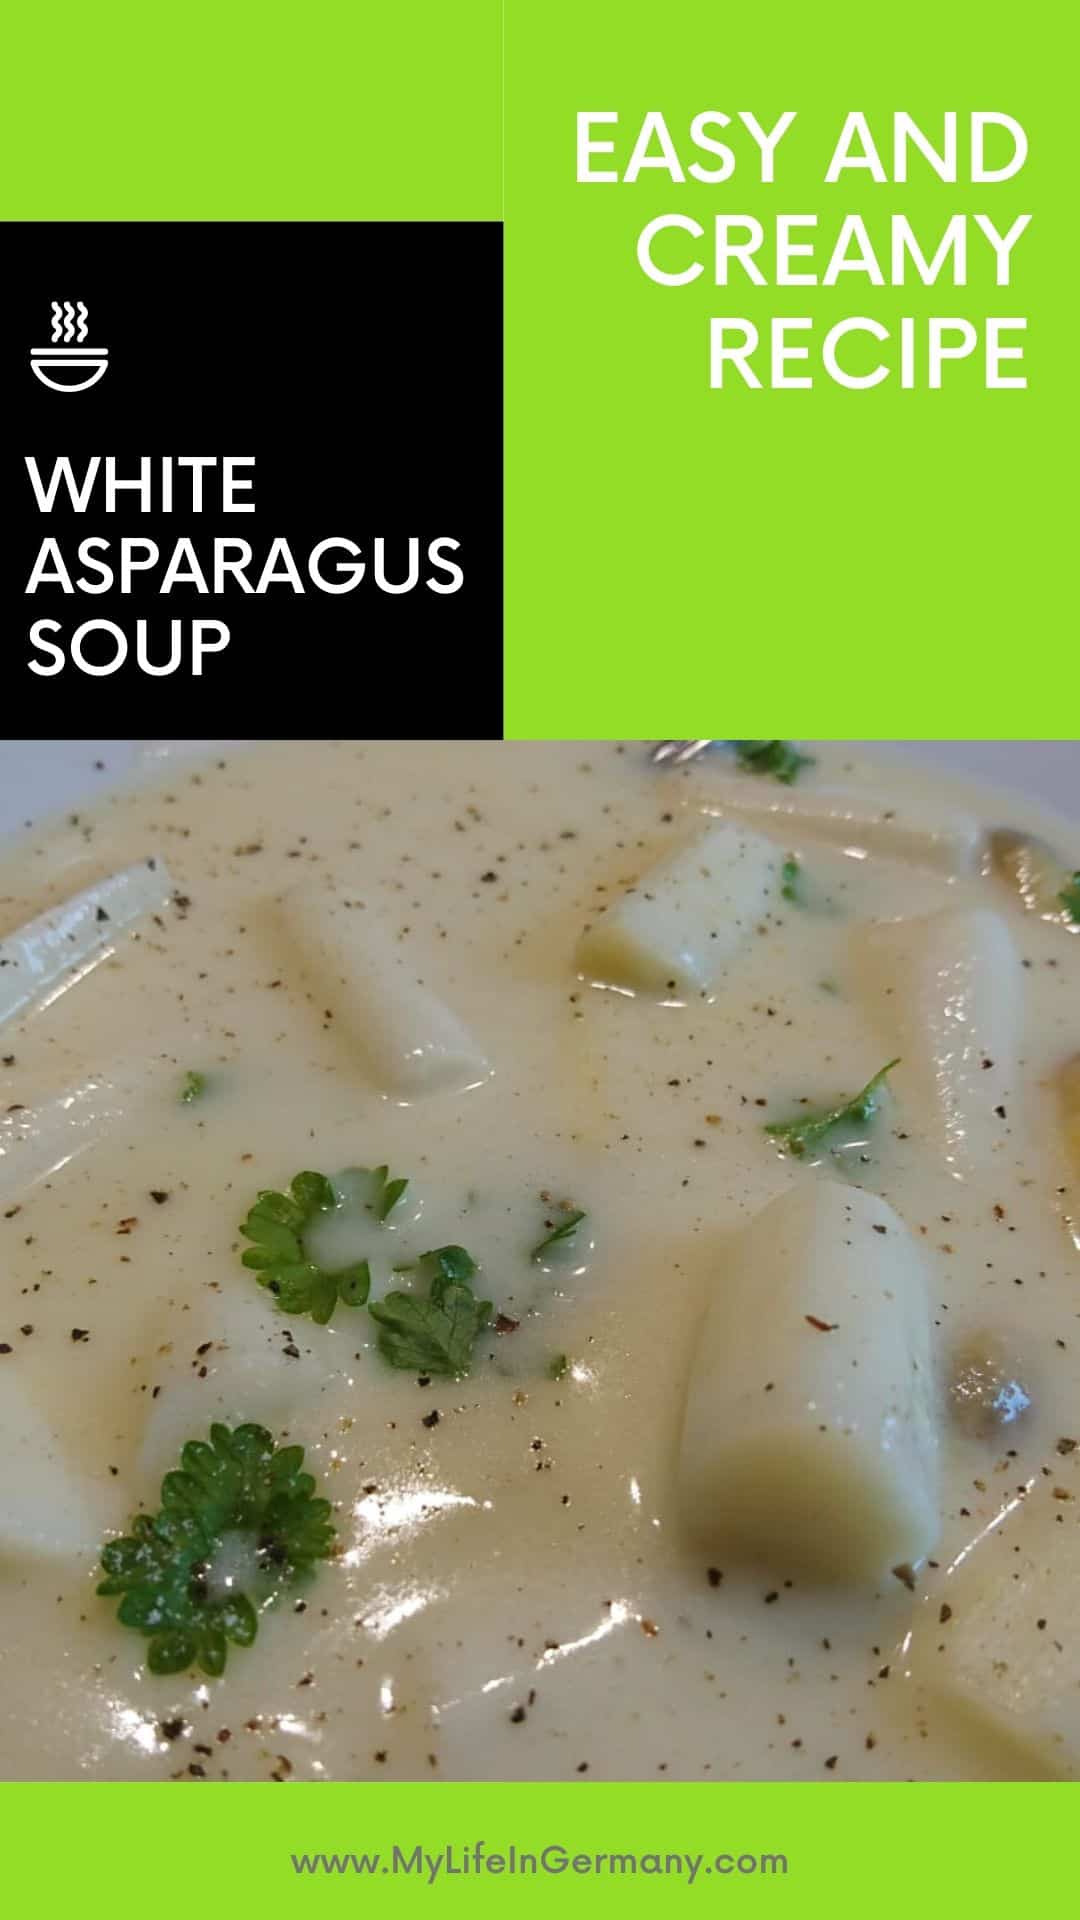 Pinterest image_white asparagus soup_spargelsuppe_easy and creamy recipe_my life in germany_hkwomanabroad-min